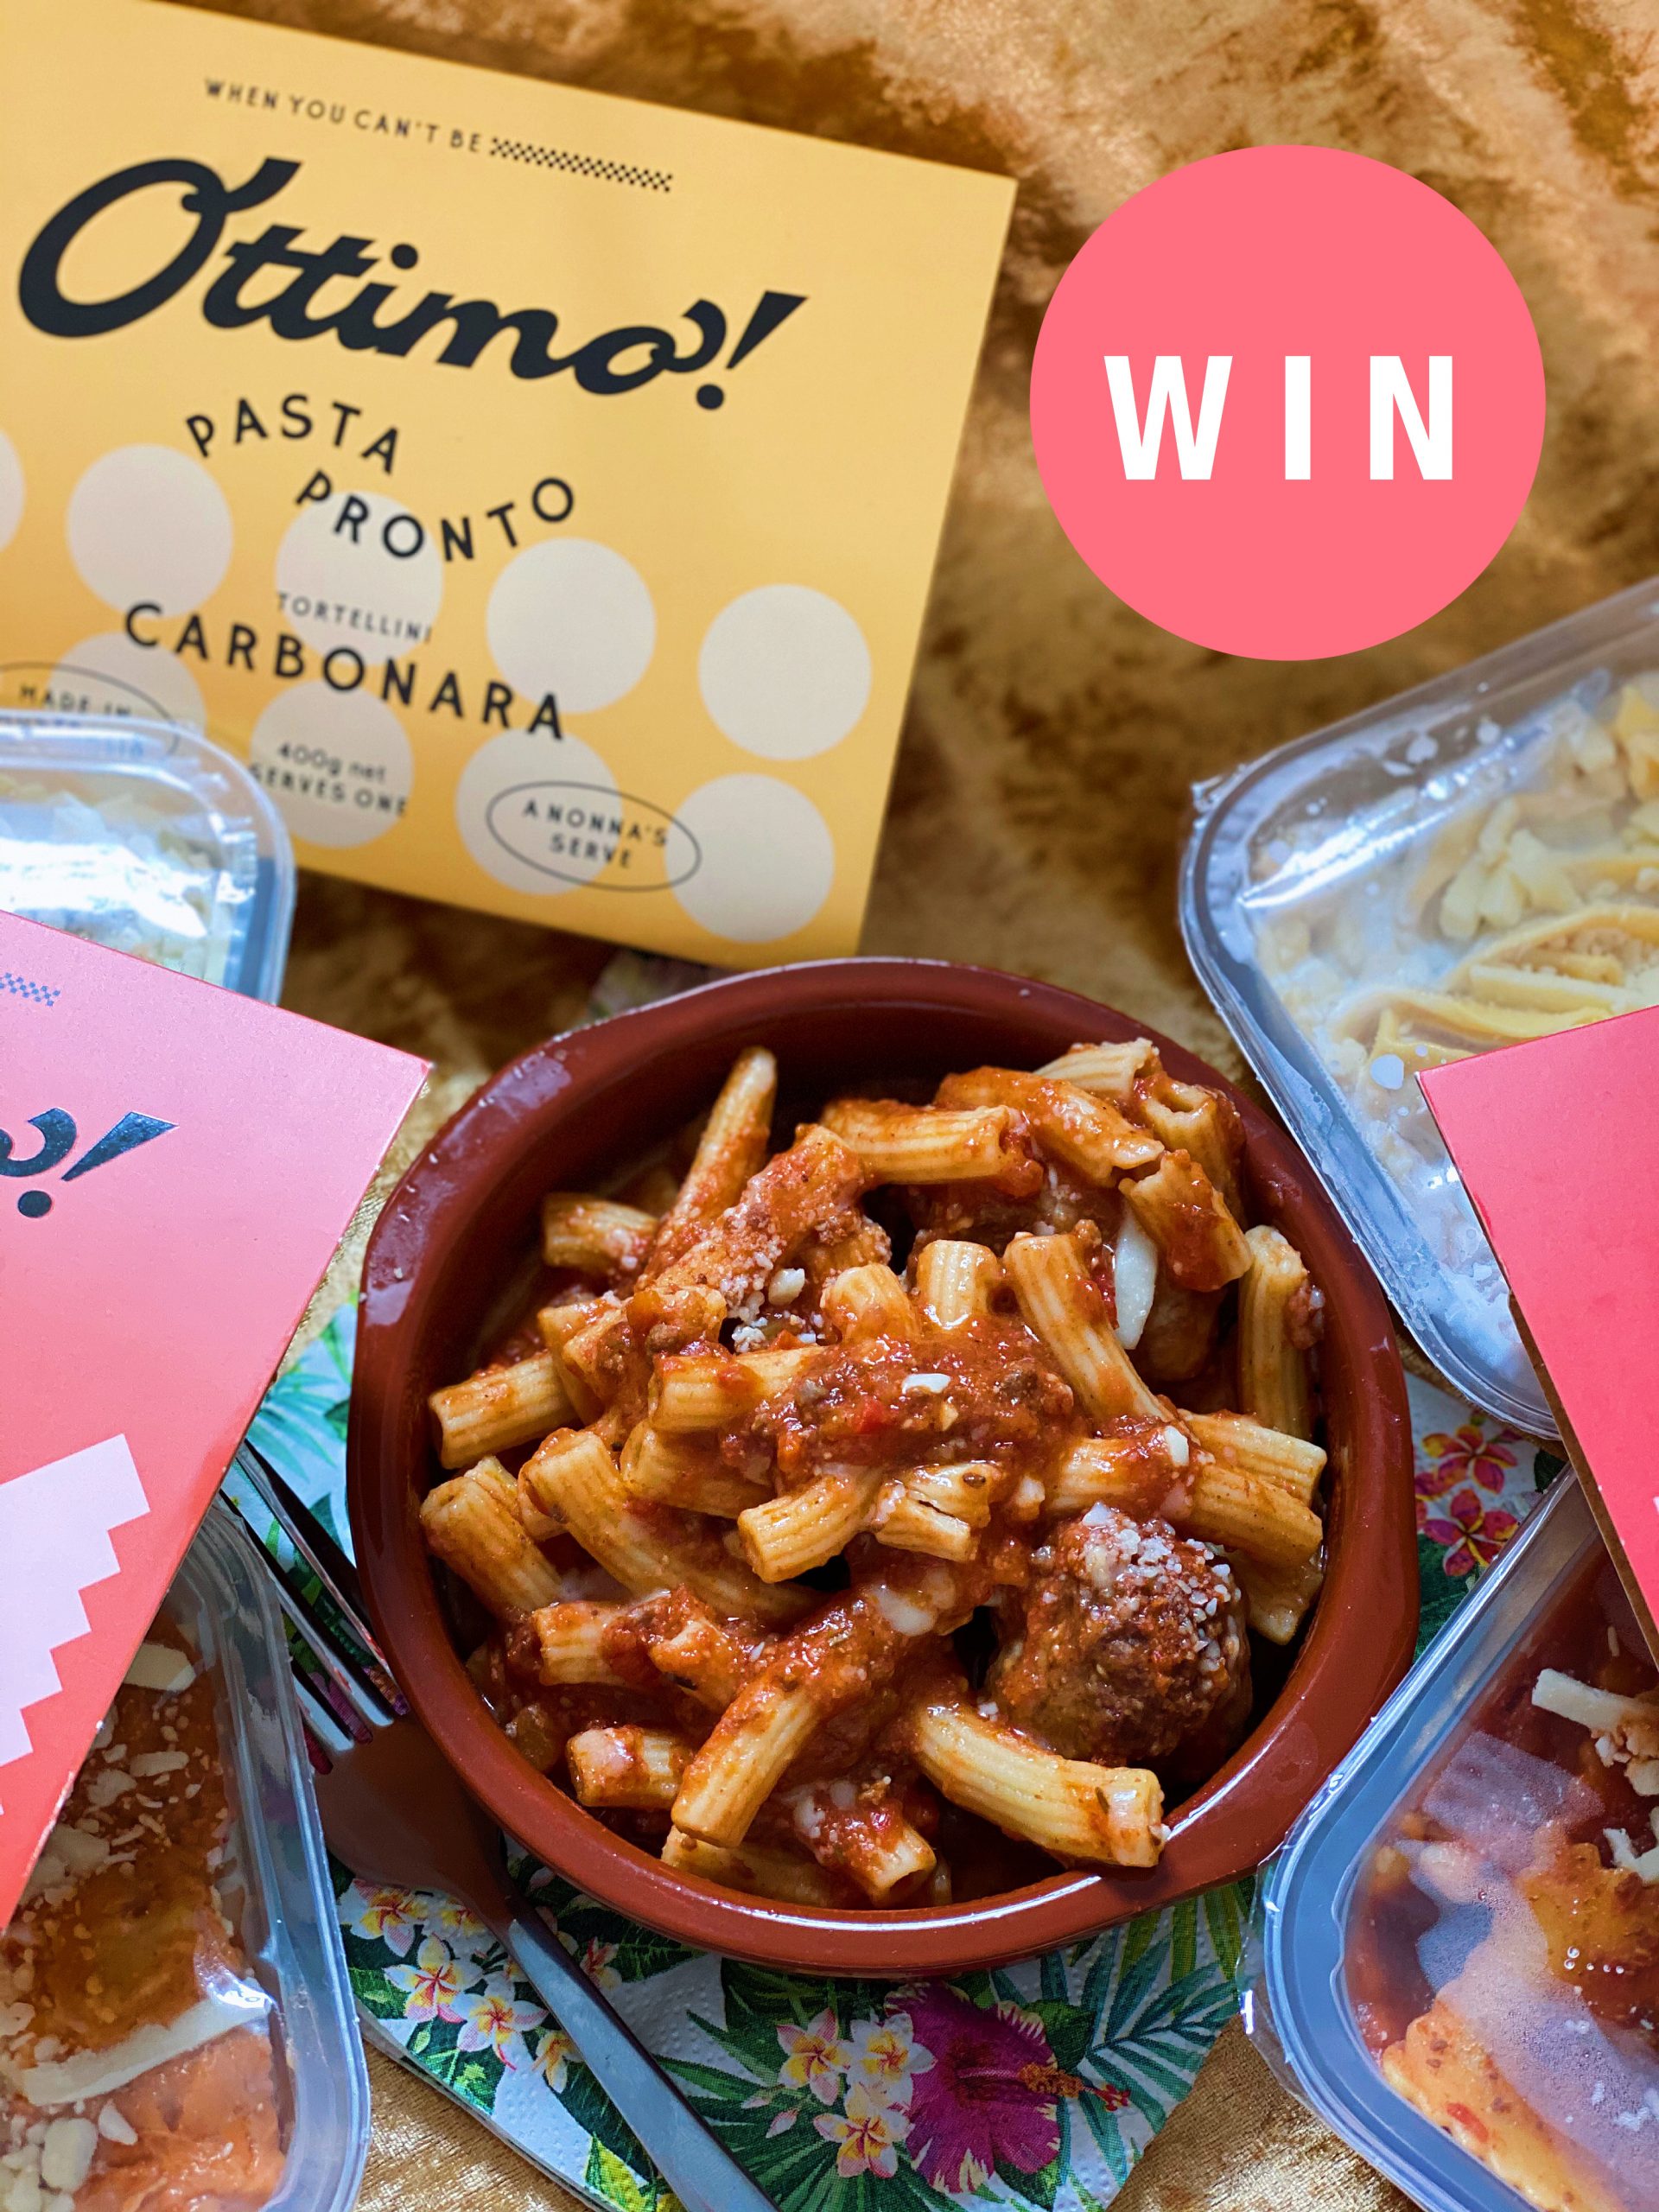 WIN 30 x packs of delicious Ottimo! Pasta Pronto to share with a friend